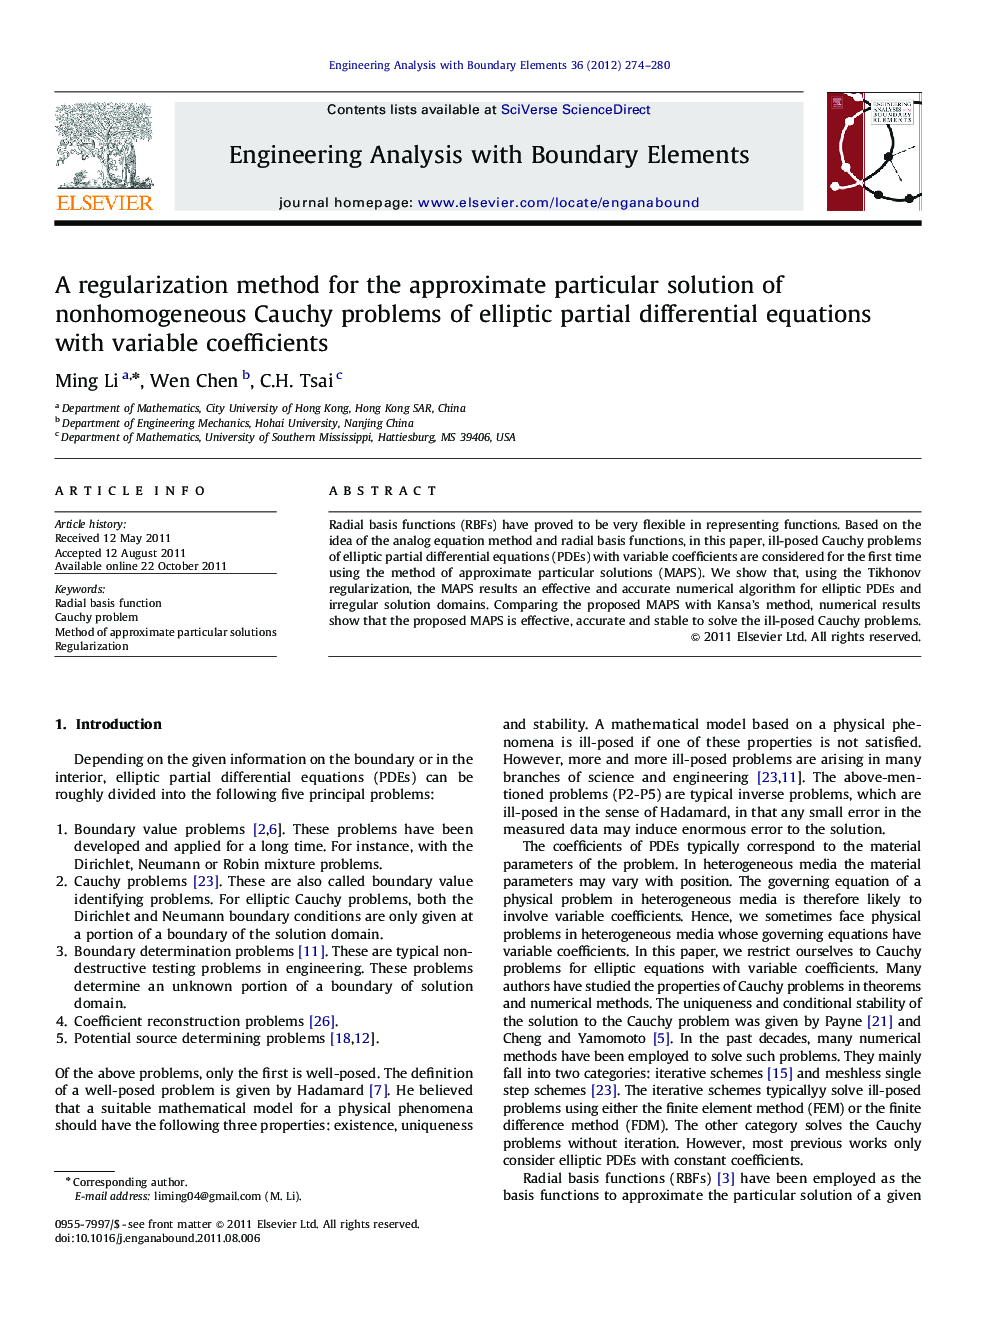 A regularization method for the approximate particular solution of nonhomogeneous Cauchy problems of elliptic partial differential equations with variable coefficients